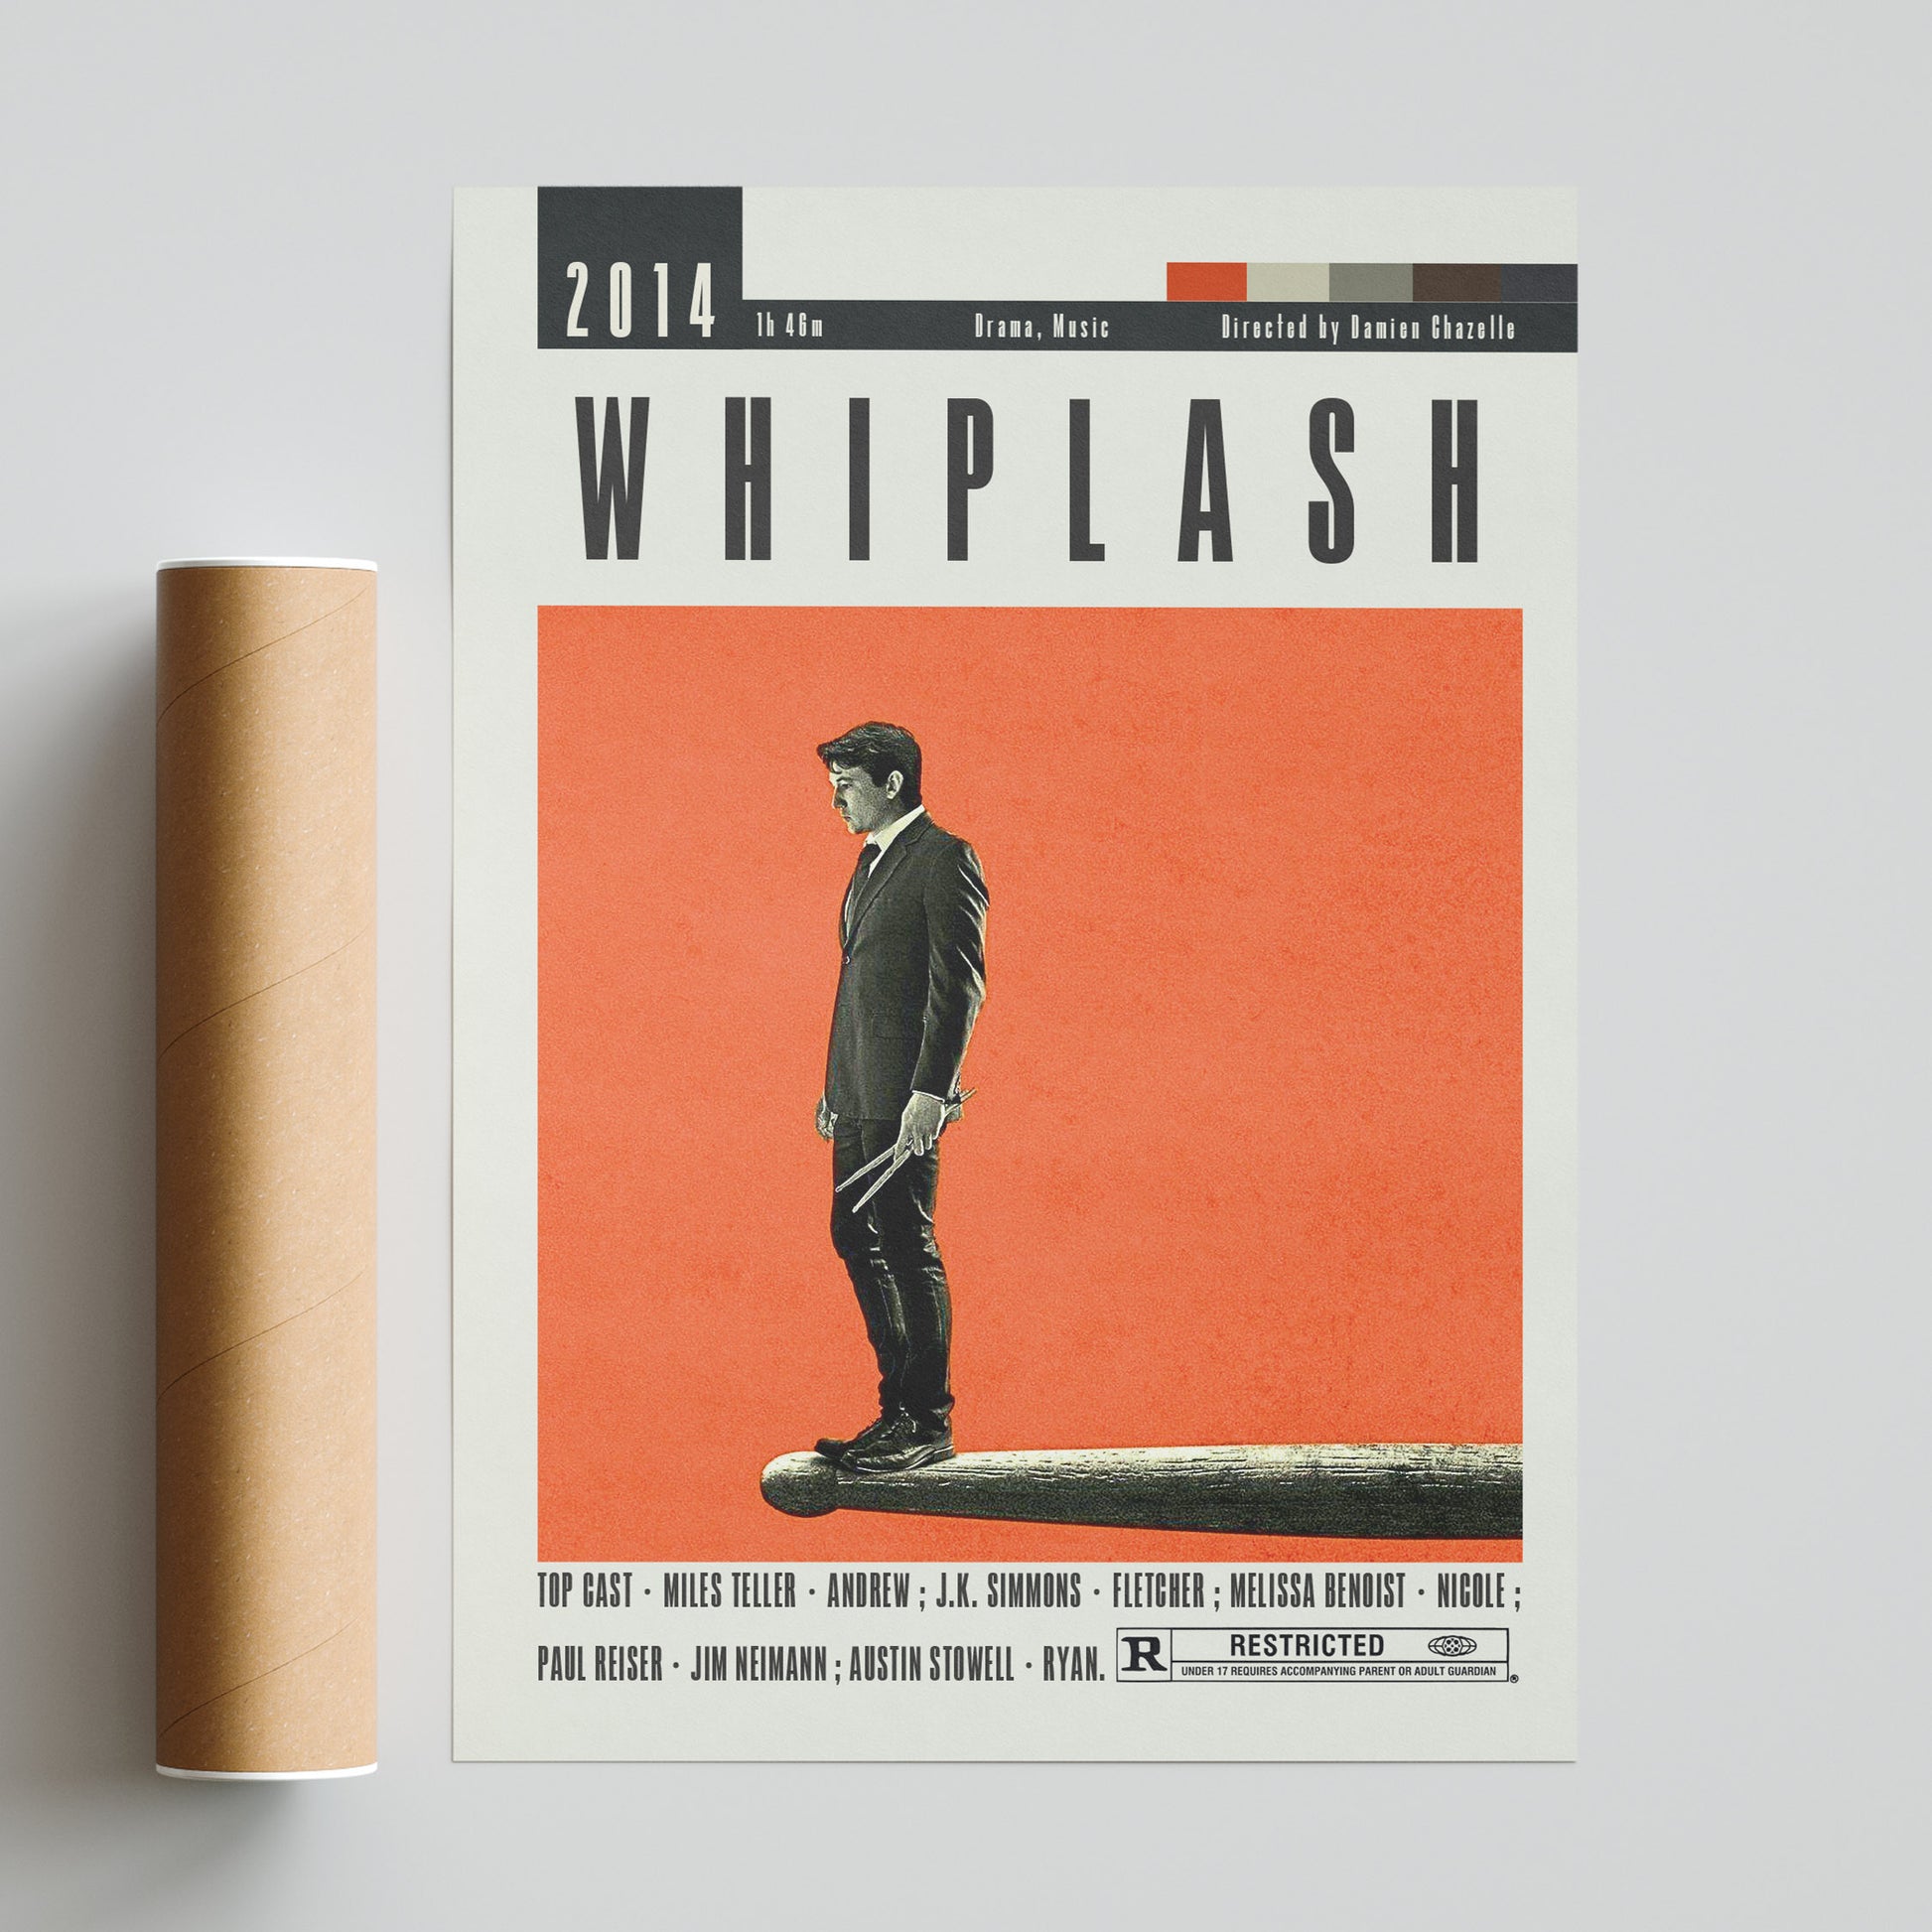 Add some retro flair to your walls with the Whiplash Poster featuring a minimal yet eye-catching design. Perfect for fans of Damien Chazelle's movies, this midcentury style poster will bring a touch of nostalgia to any room. A must-have for any cinema lover.